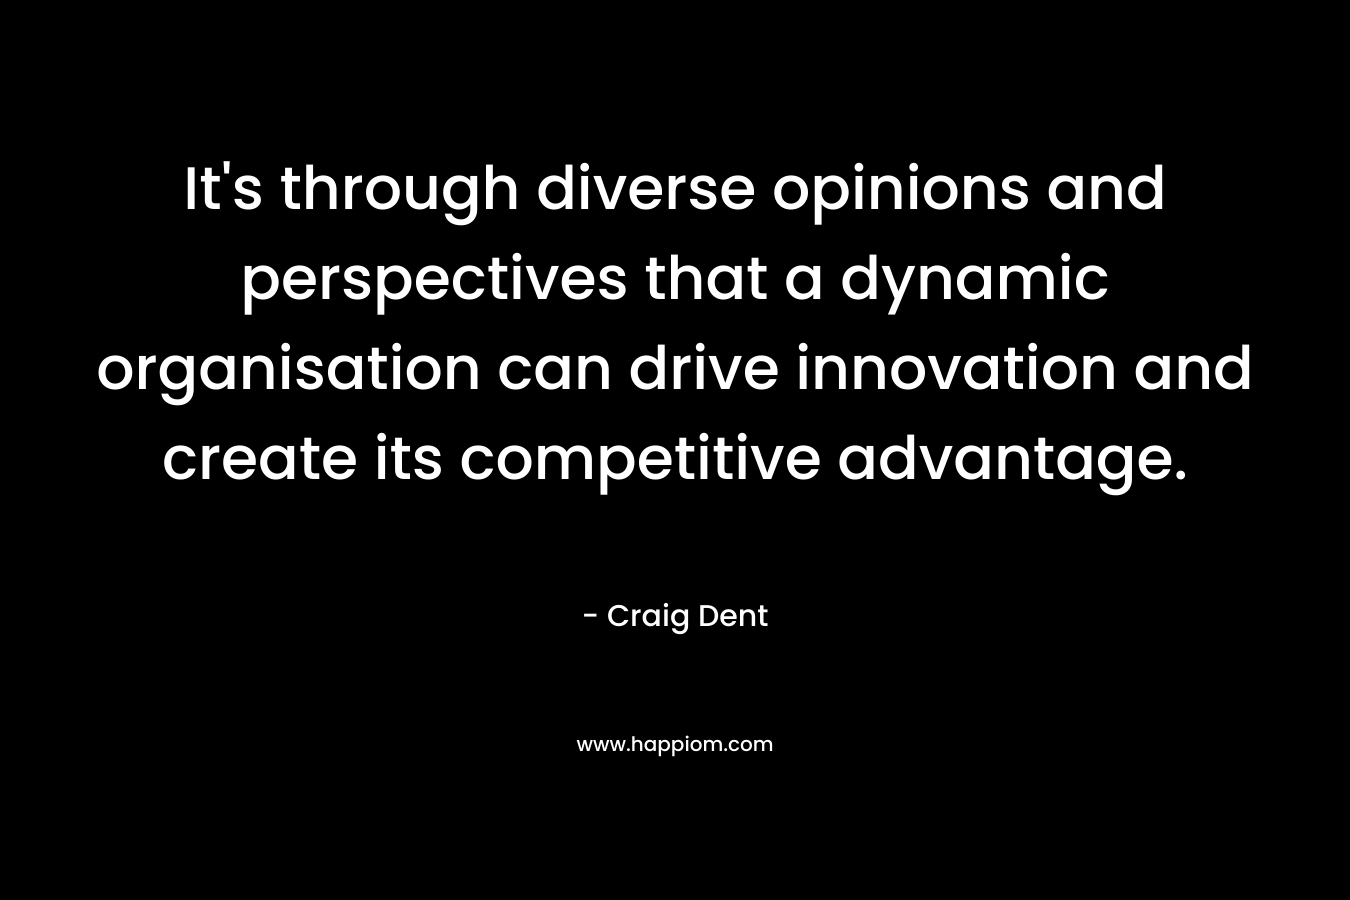 It's through diverse opinions and perspectives that a dynamic organisation can drive innovation and create its competitive advantage.